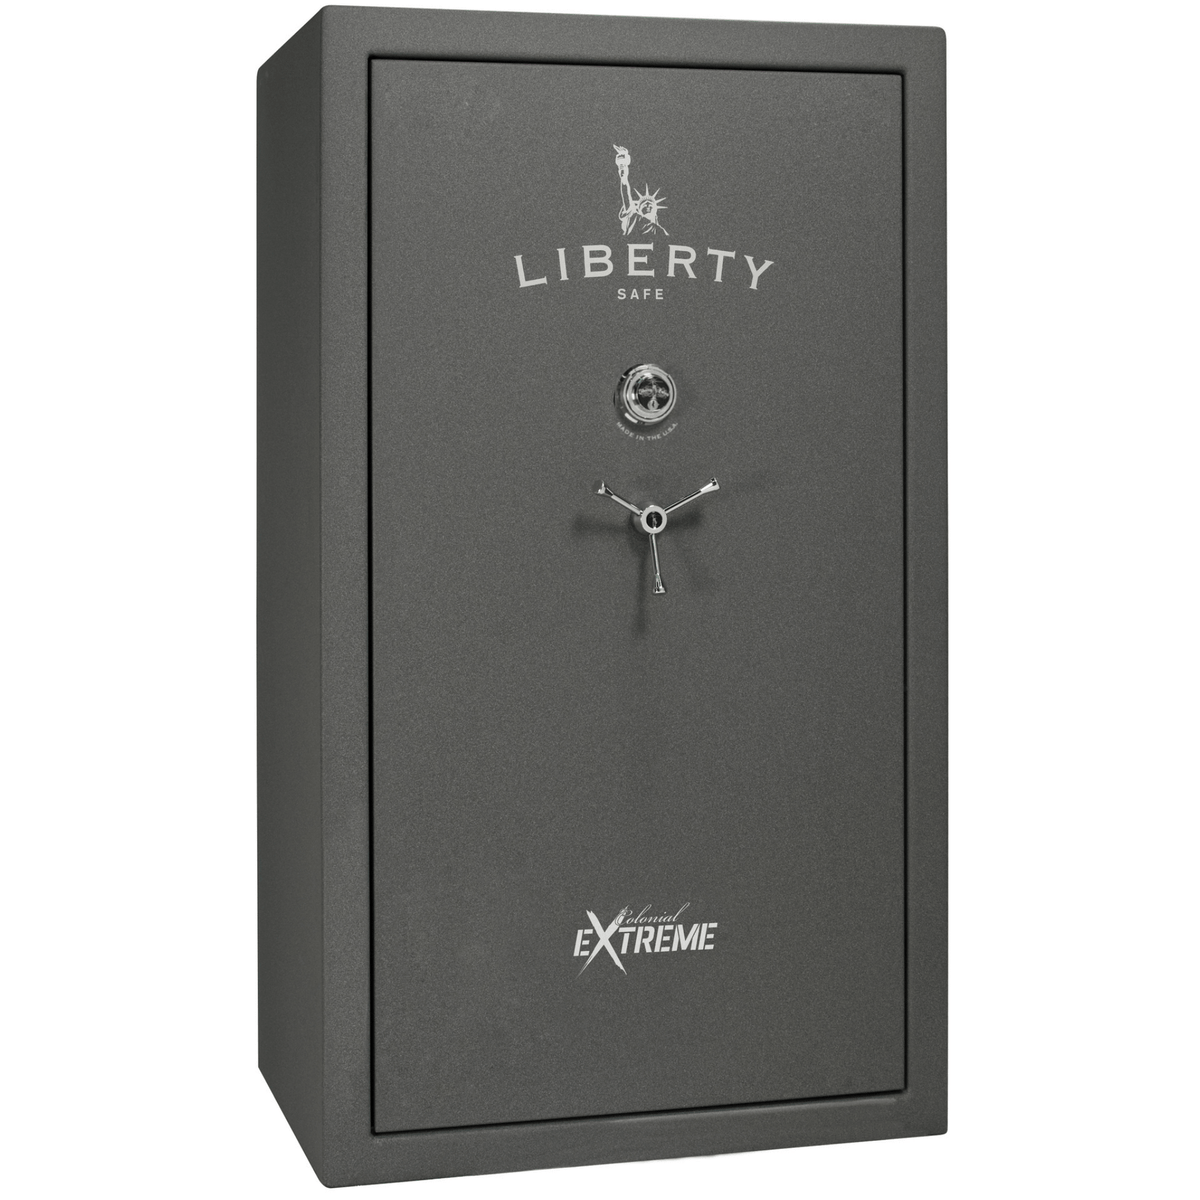 Liberty Colonial 50 Extreme Safe in Textured Granite with Chrome Mechanical Lock.